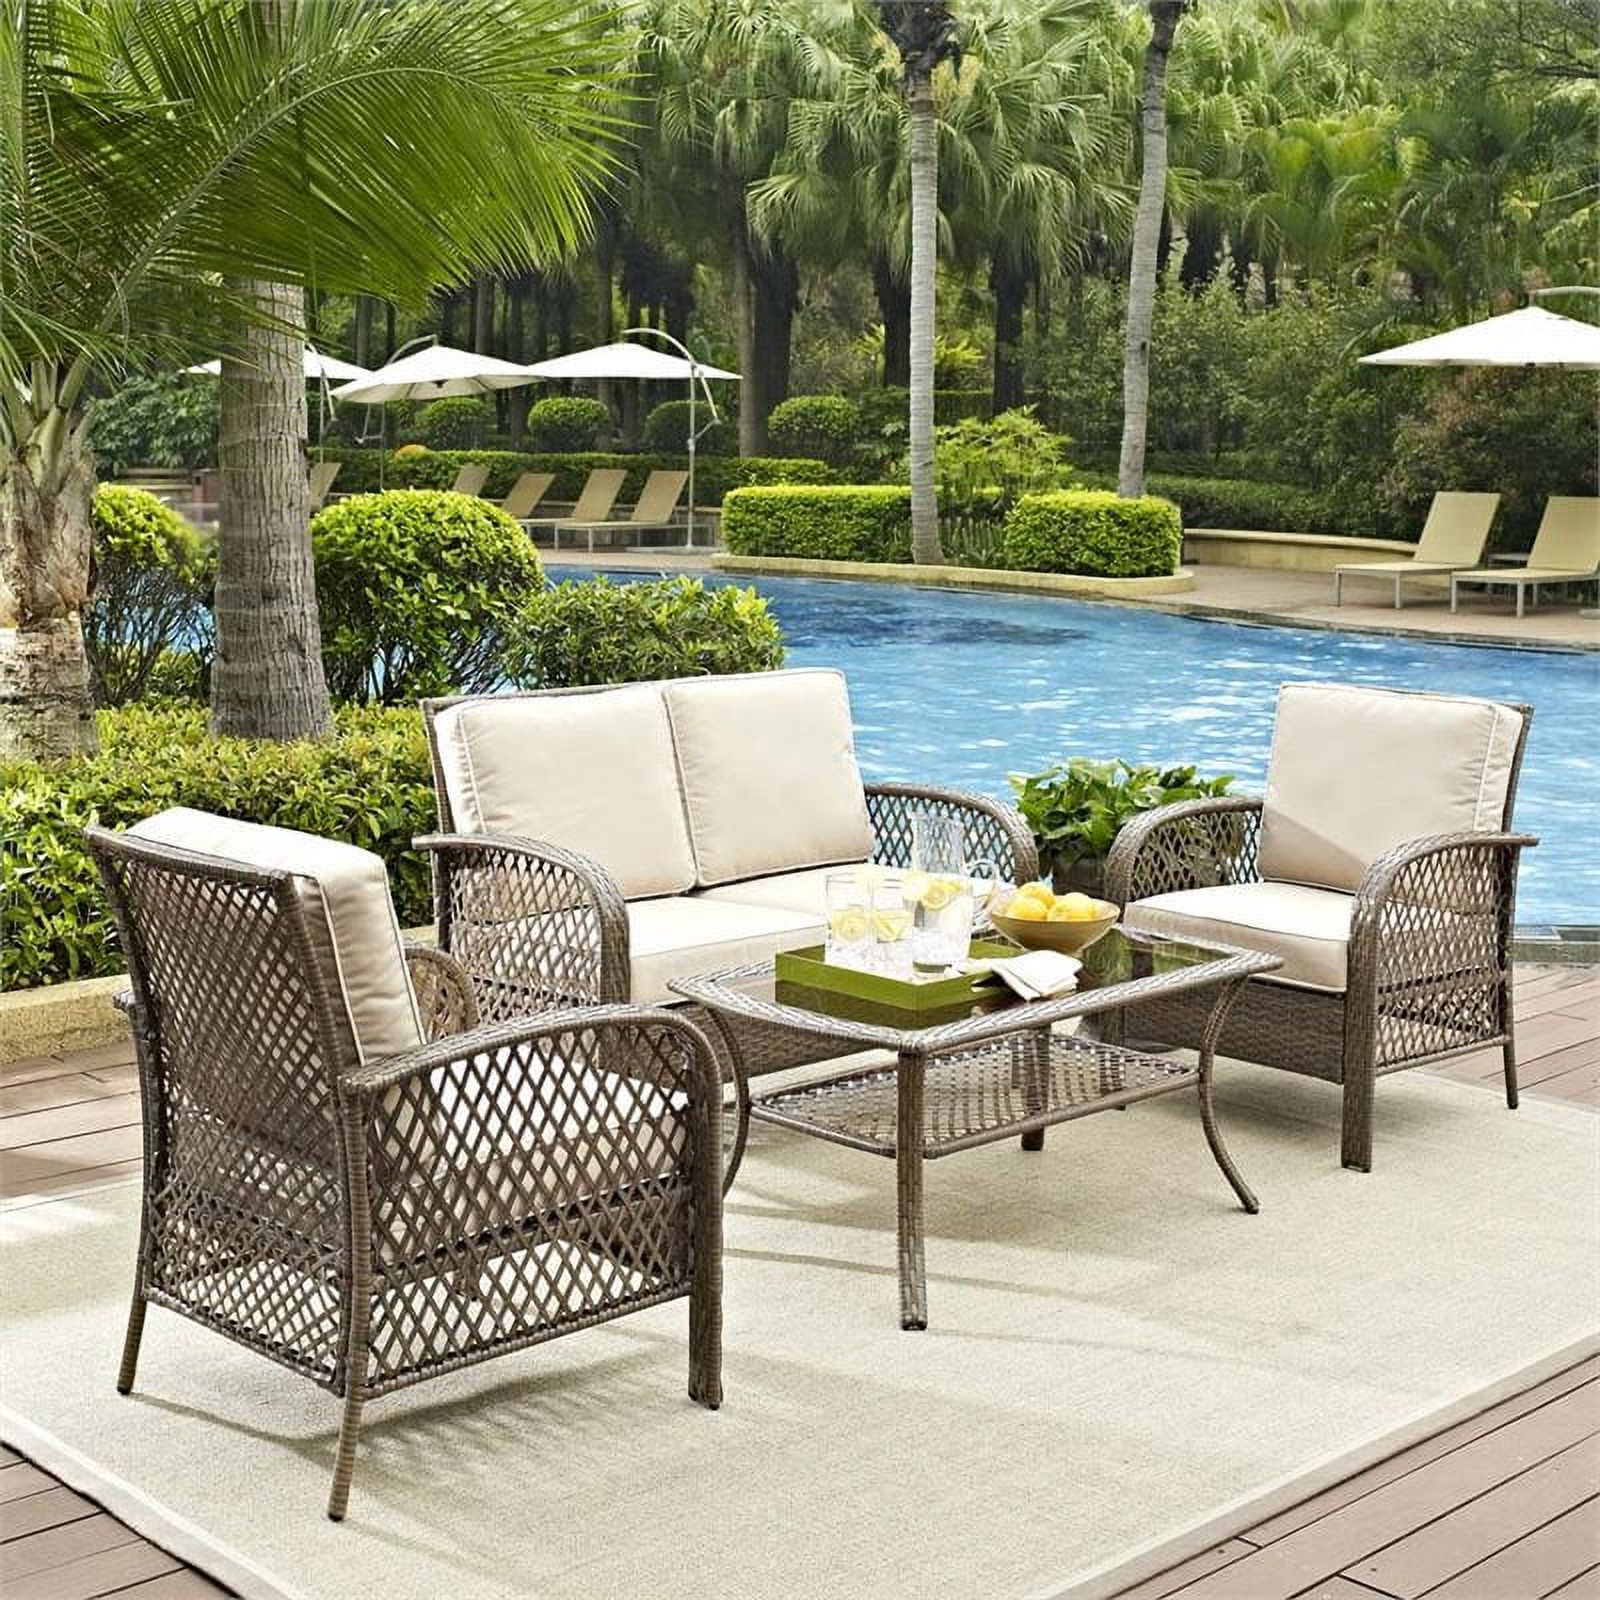 Crosley Furniture Tribeca 4 Piece Outdoor Wicker Seating Set With Sand Cushions - Loveseat, 2 Arm Chairs, And Coffee Table - image 1 of 7